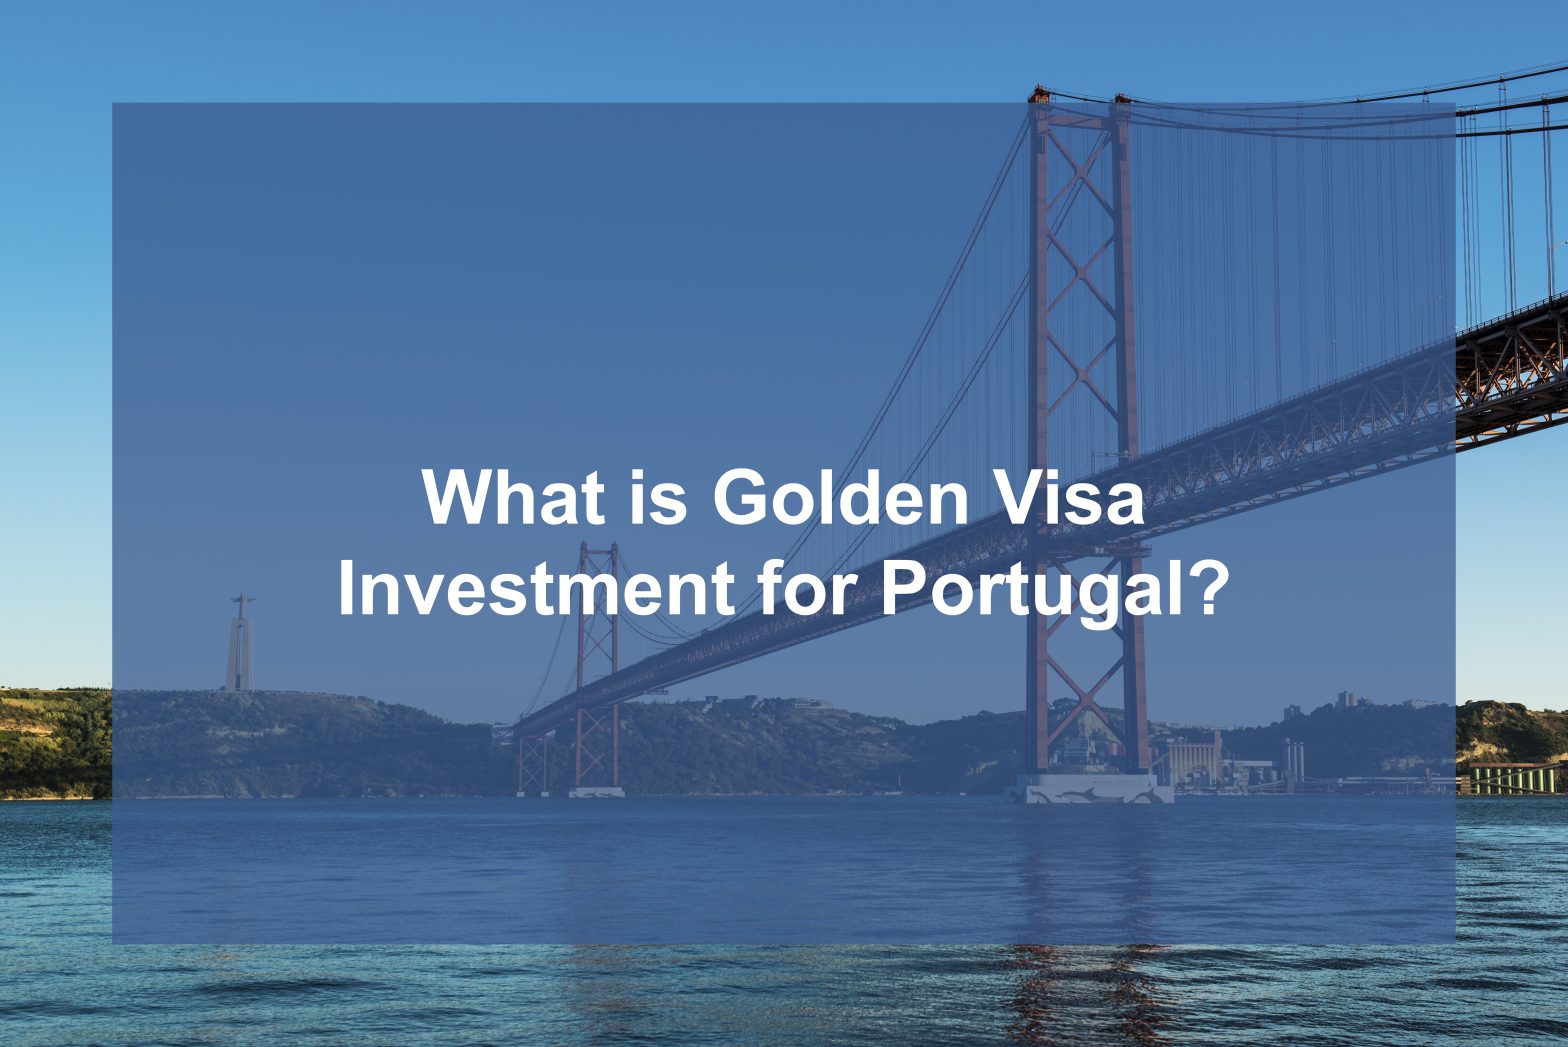 Settle in Portugal with the help of Golden Visa Investment Program for Portugal